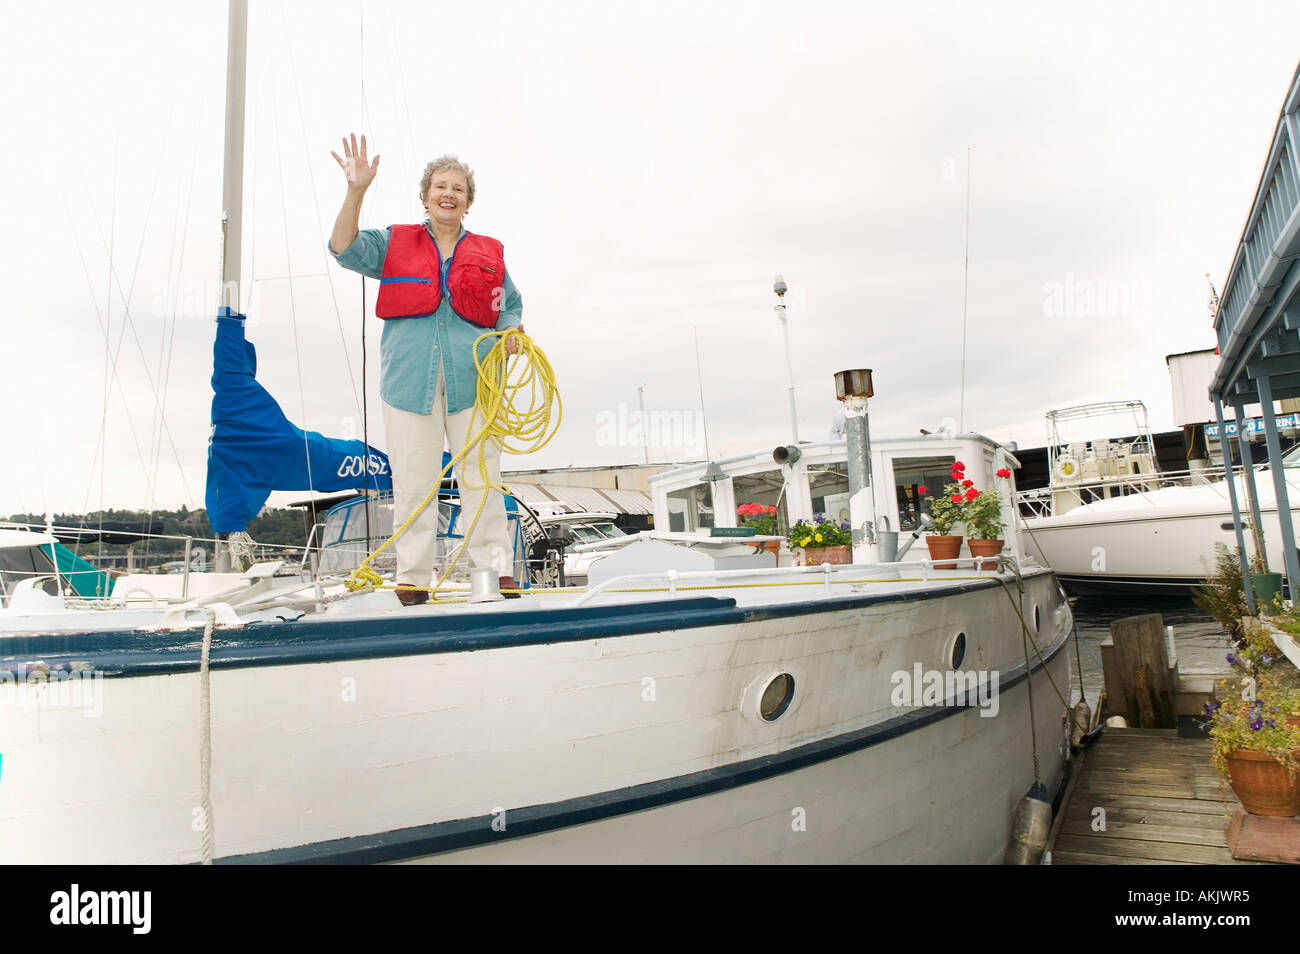 Waving woman on deck of houseboat Stock Photo